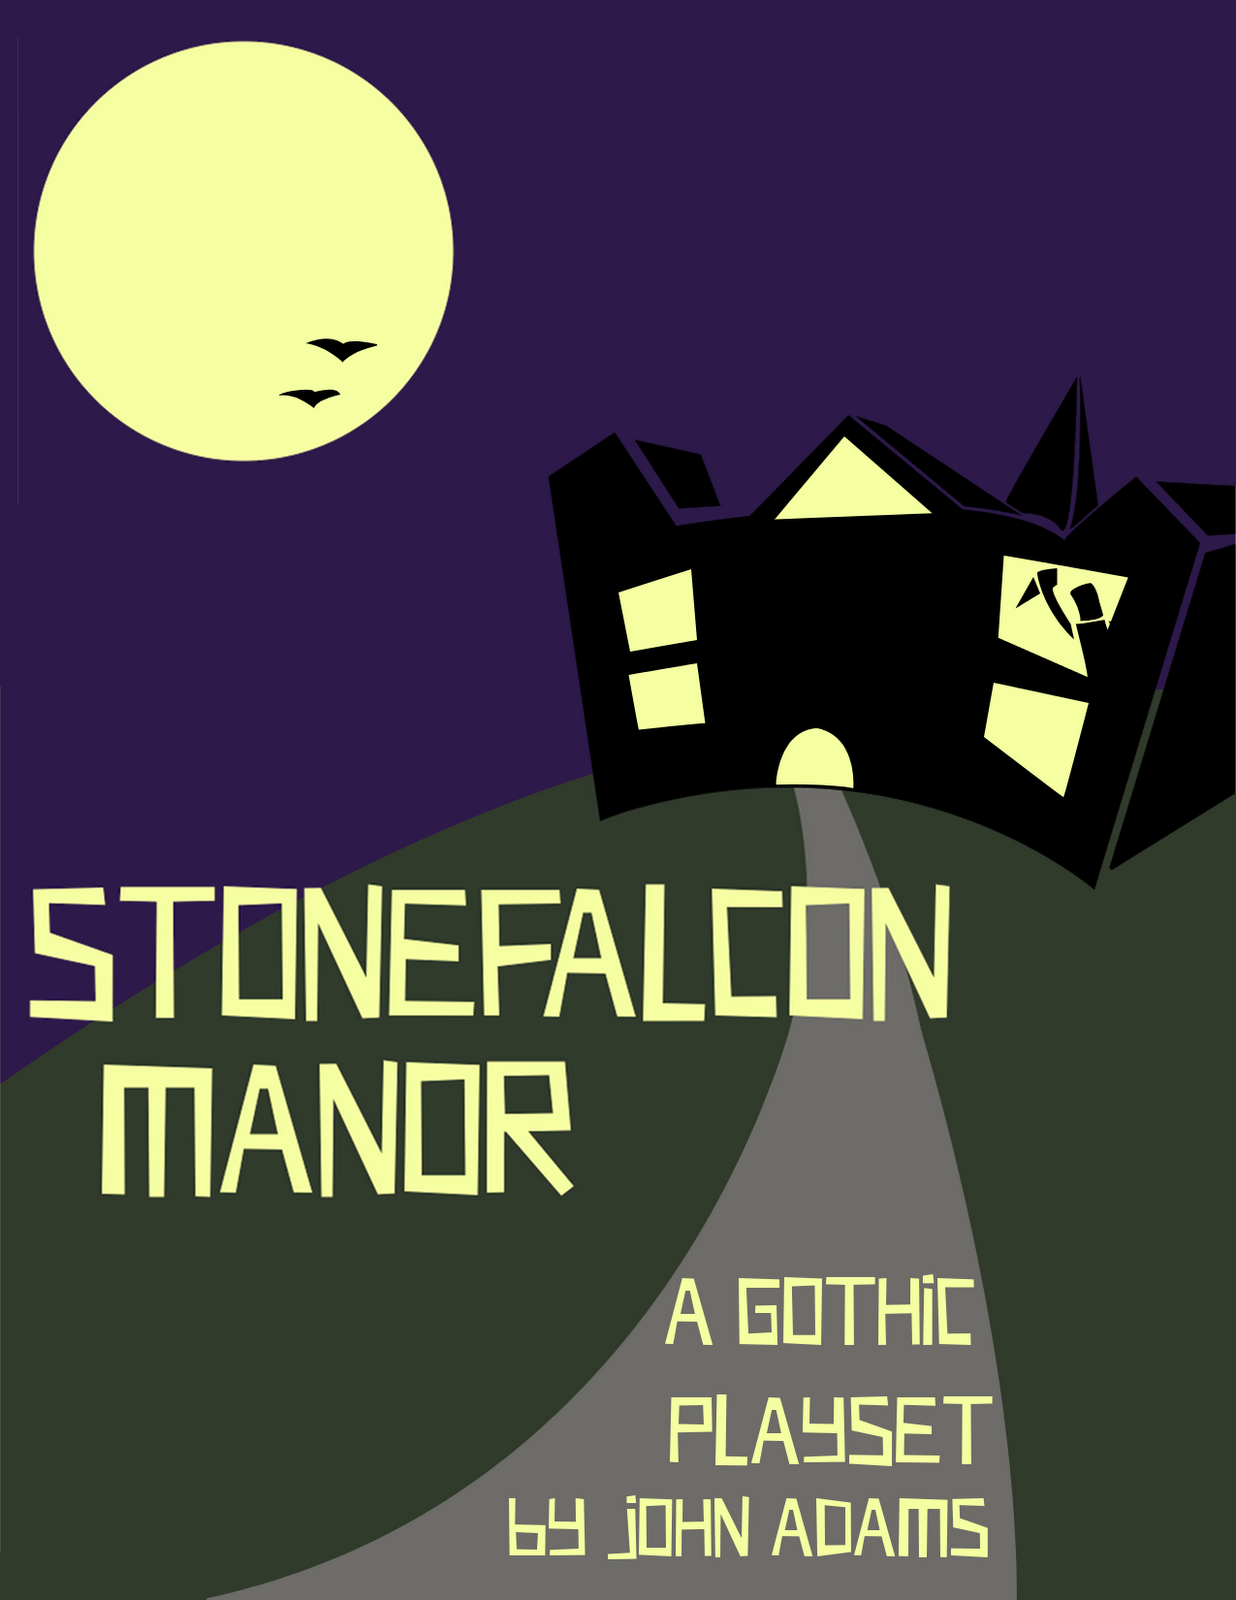 Stonefalcon+Manor+halfletter.png